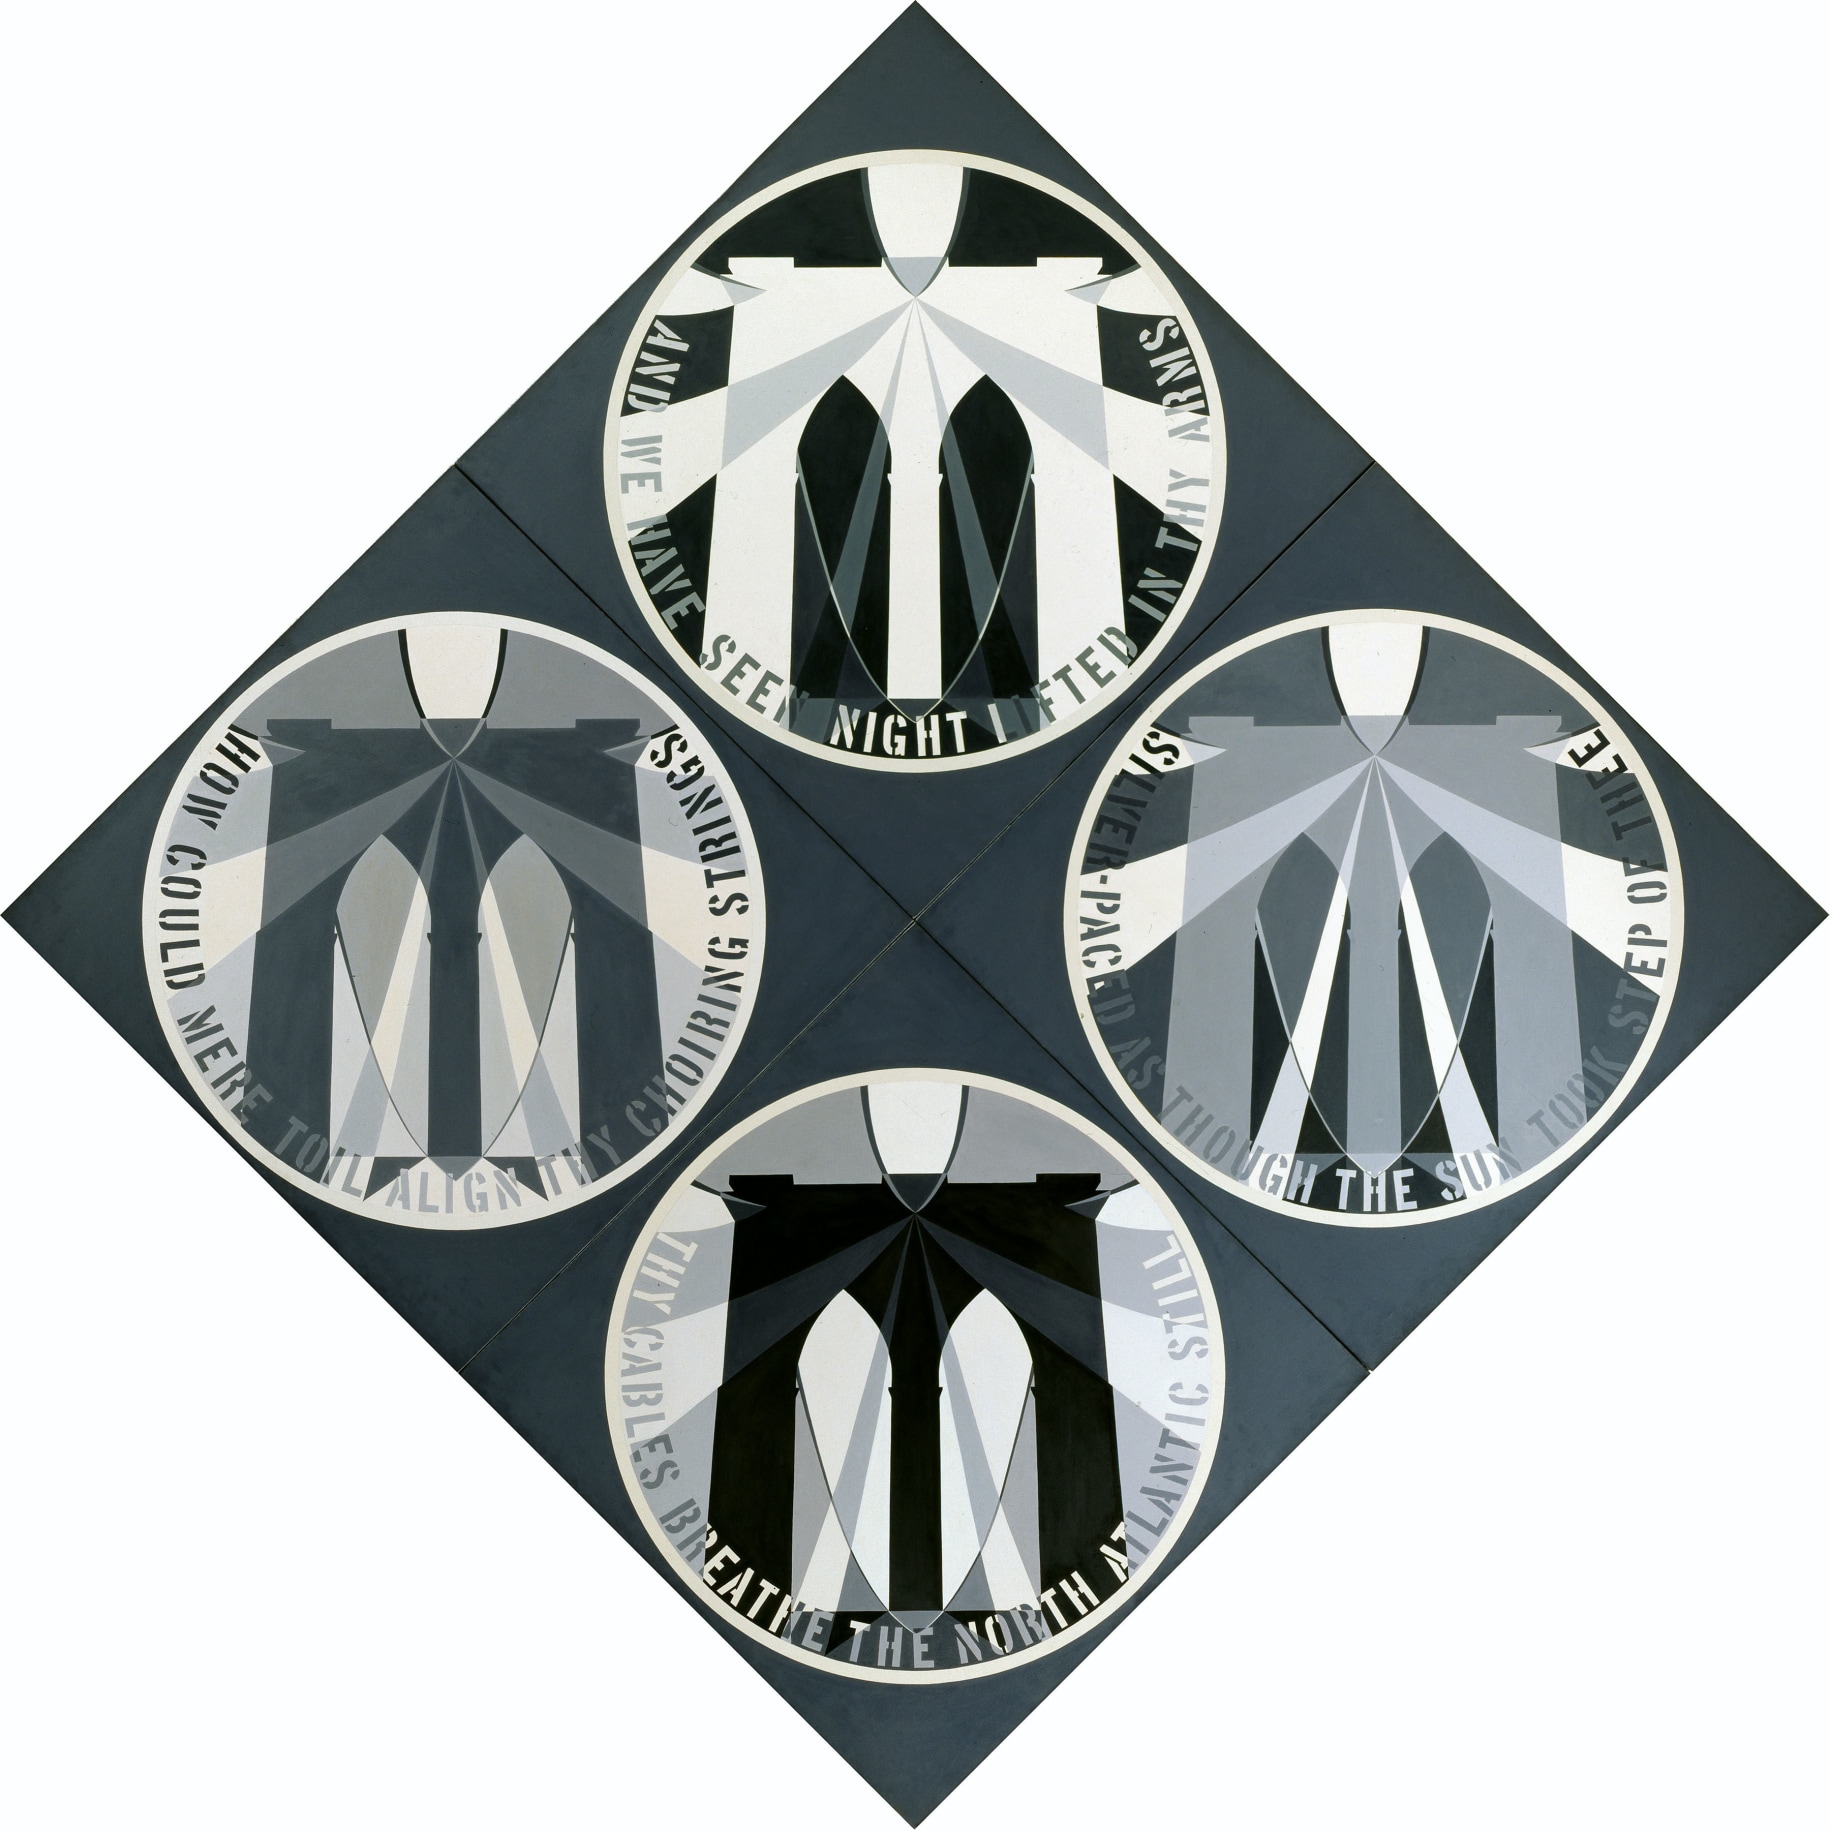 The Brooklyn Bridge, a diamond shaped canvas consisting of four panels, measuring 135 by 135 inches overall. Each panel contains a grisaille image of the Brooklyn Bridge within a circle, captured at different times of the day, against a dark gray ground. Each circle contains light gray text wrapping around the inner edge of the ring. The text reads &ldquo;And we have seen night lifted in thy arms,&rdquo; &ldquo;Silver paces as though the sun took step of thee,&rdquo; They cables breathe the North Atlantic still,&rdquo; and &ldquo;How could mere toil align thy choiring strings.&rdquo;, clockwise from top,